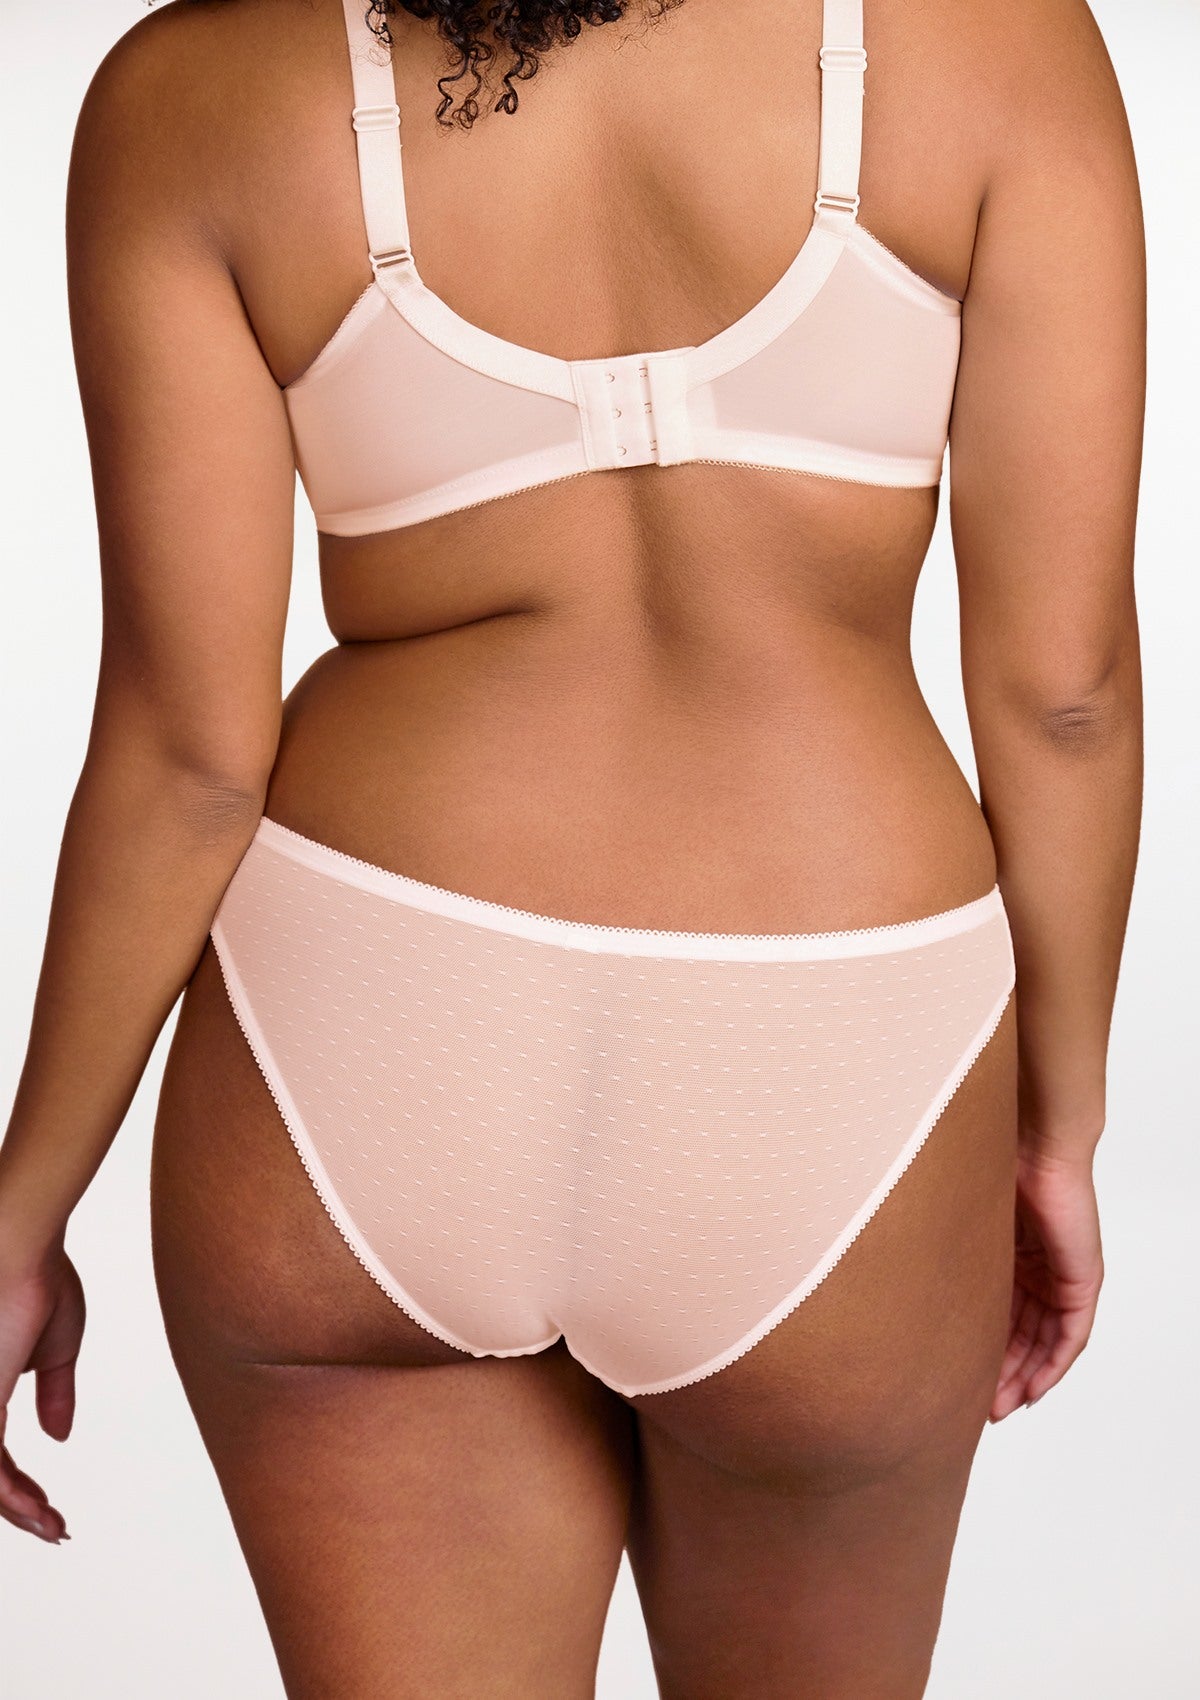 HSIA Mid-Rise Sheer Stylish Lace-Trimmed Supportive Comfy Mesh Pantie - XXXL / Dusty Peach